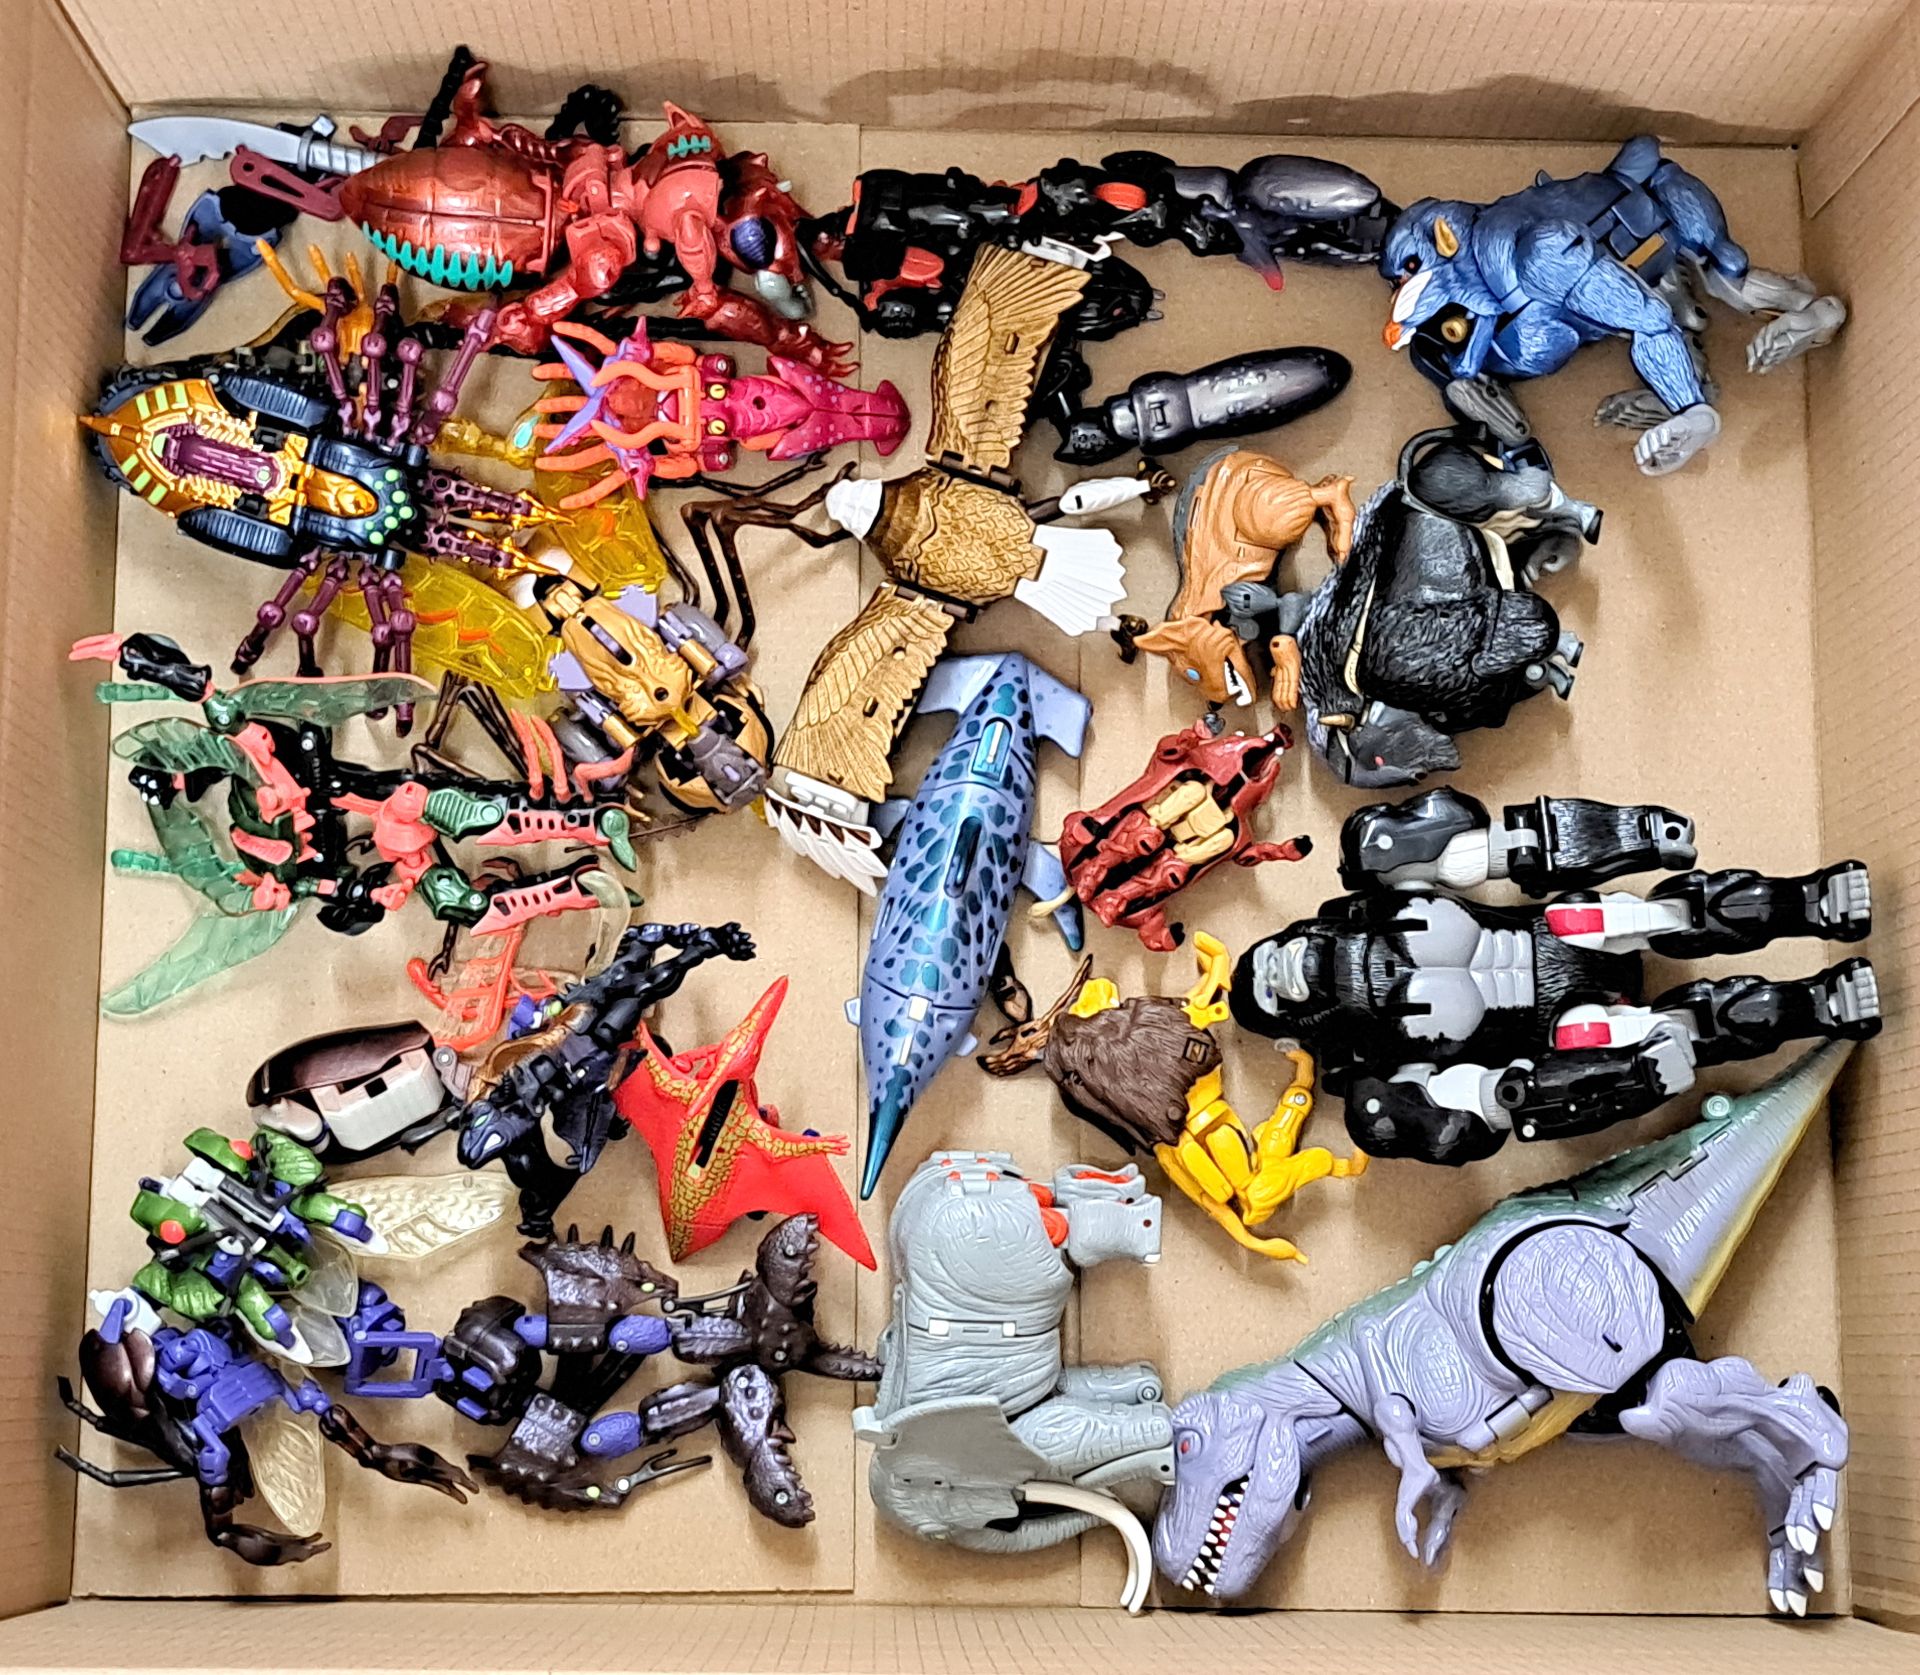 Quantity of loose Hasbro Transformers Beast Wars action figures